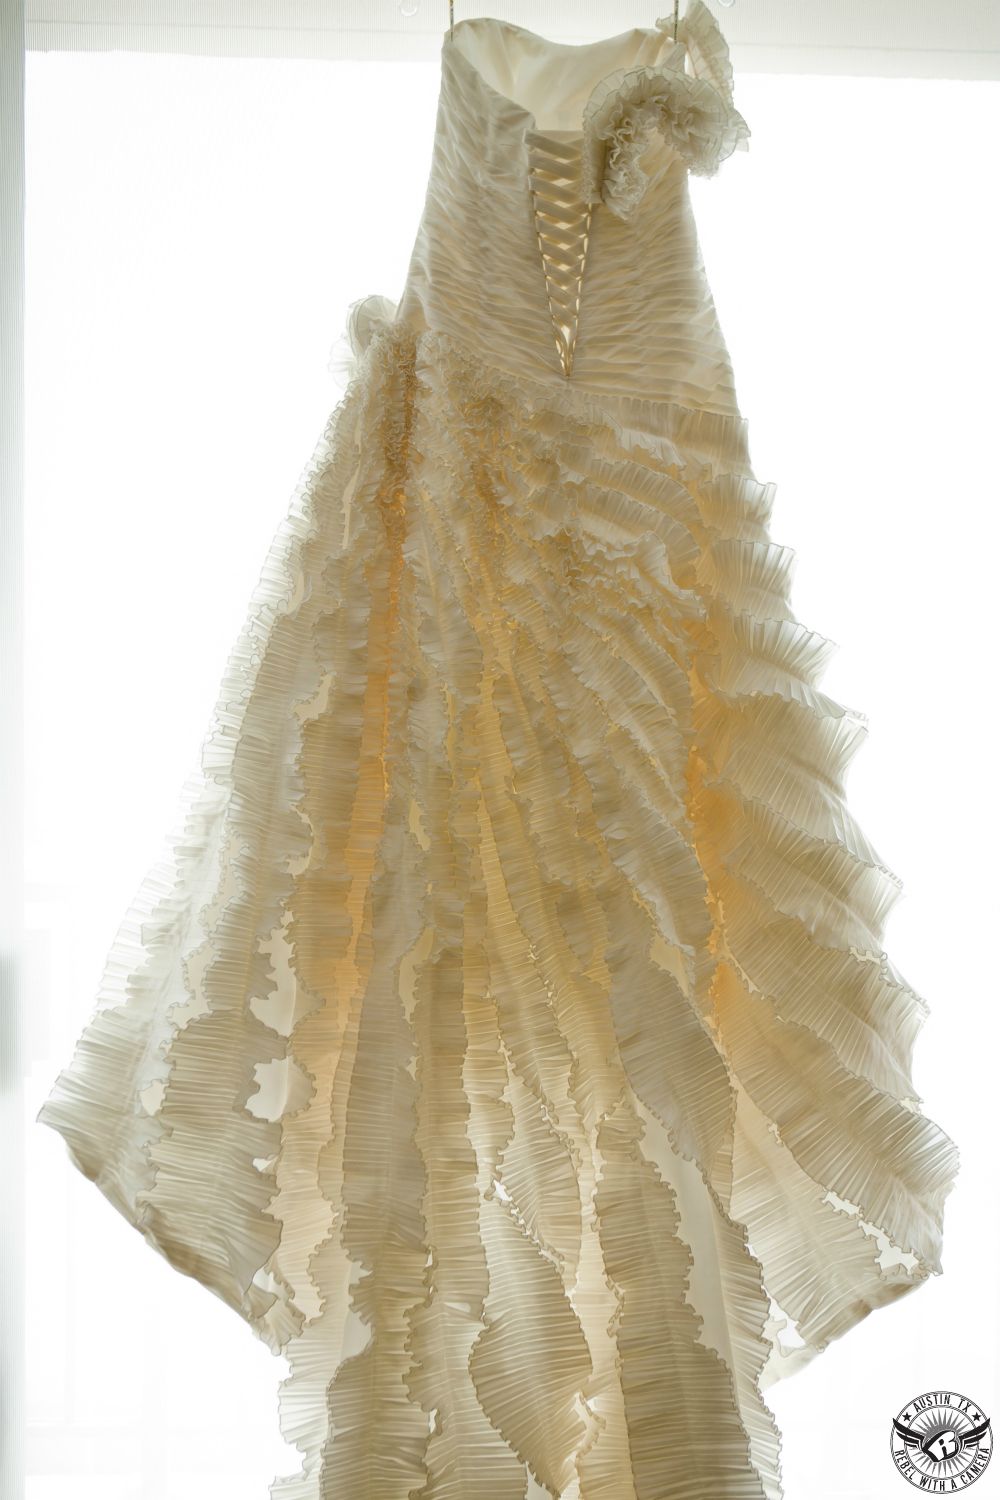 Picture of amazing ruffled wedding wedding dress hanging in the window in bridal suite at the Galleria Westin in Houston taken by Rebel with a Camera.